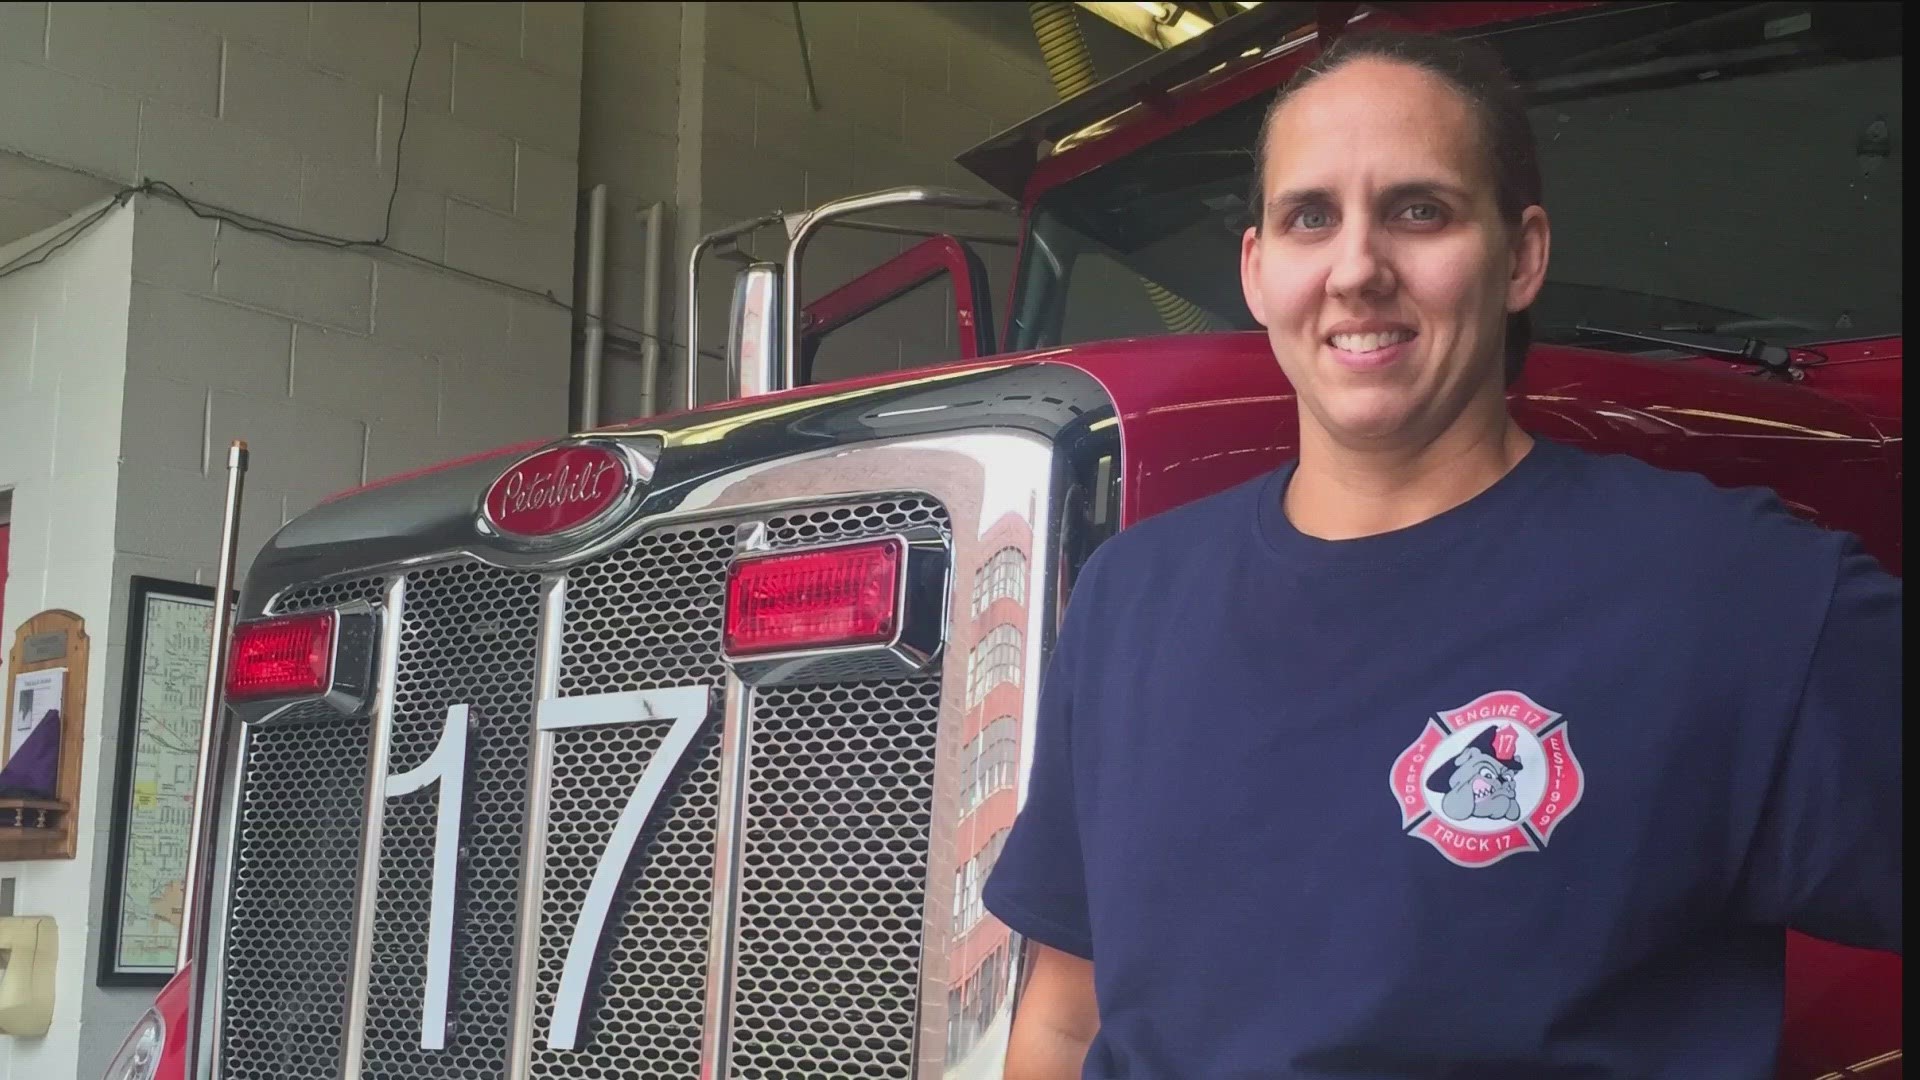 Our Kristy Gerlett spoke with Toledo Fire and Rescue chief Allison Armstrong, who opened up more about her journey to becoming chief.